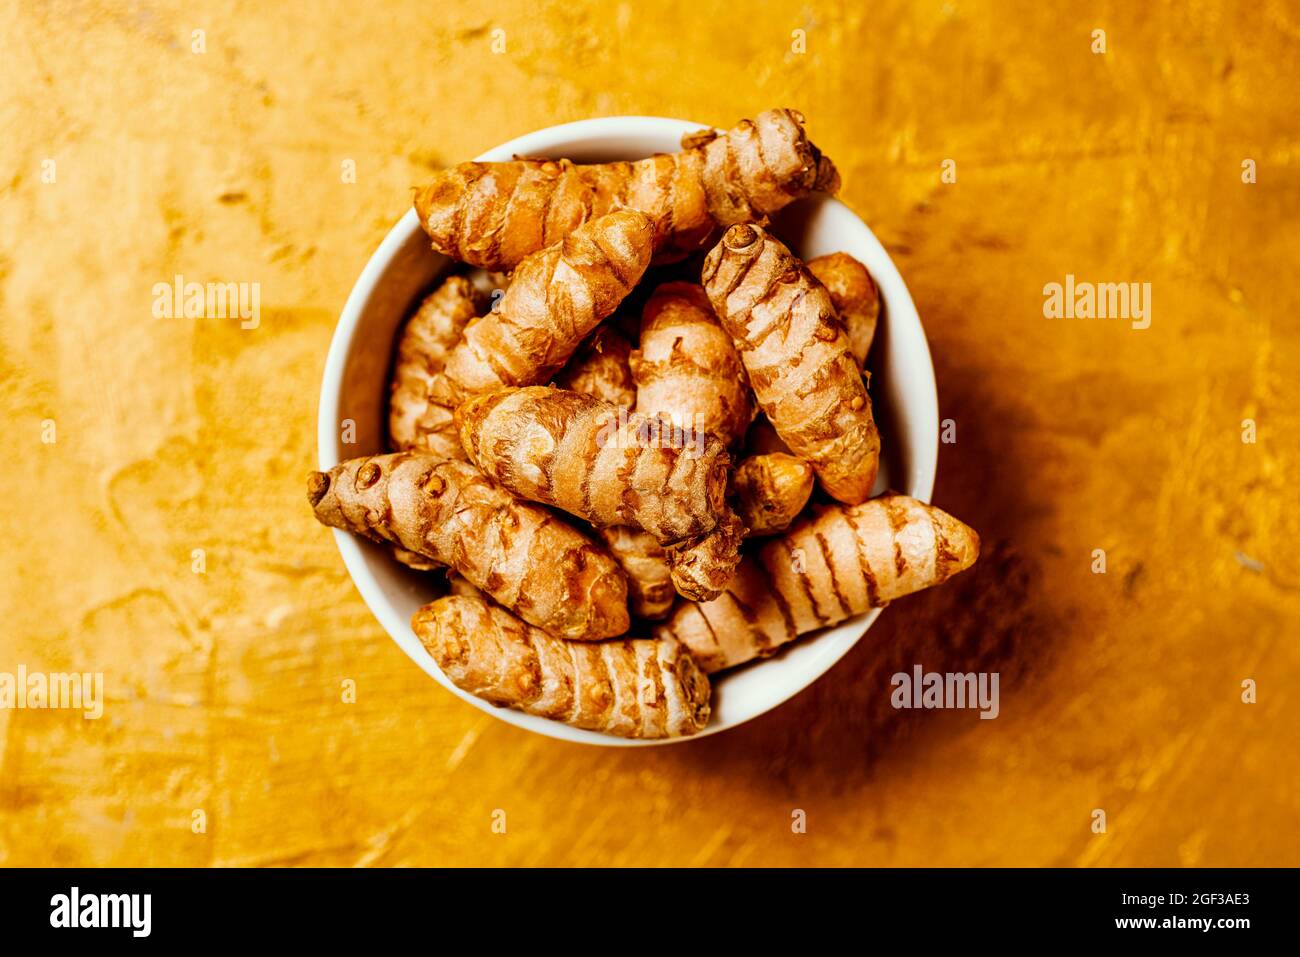 high angle view of some turmeric roots, curcuma longa species, in a ceramic bowl placed on a golden textured surface Stock Photo